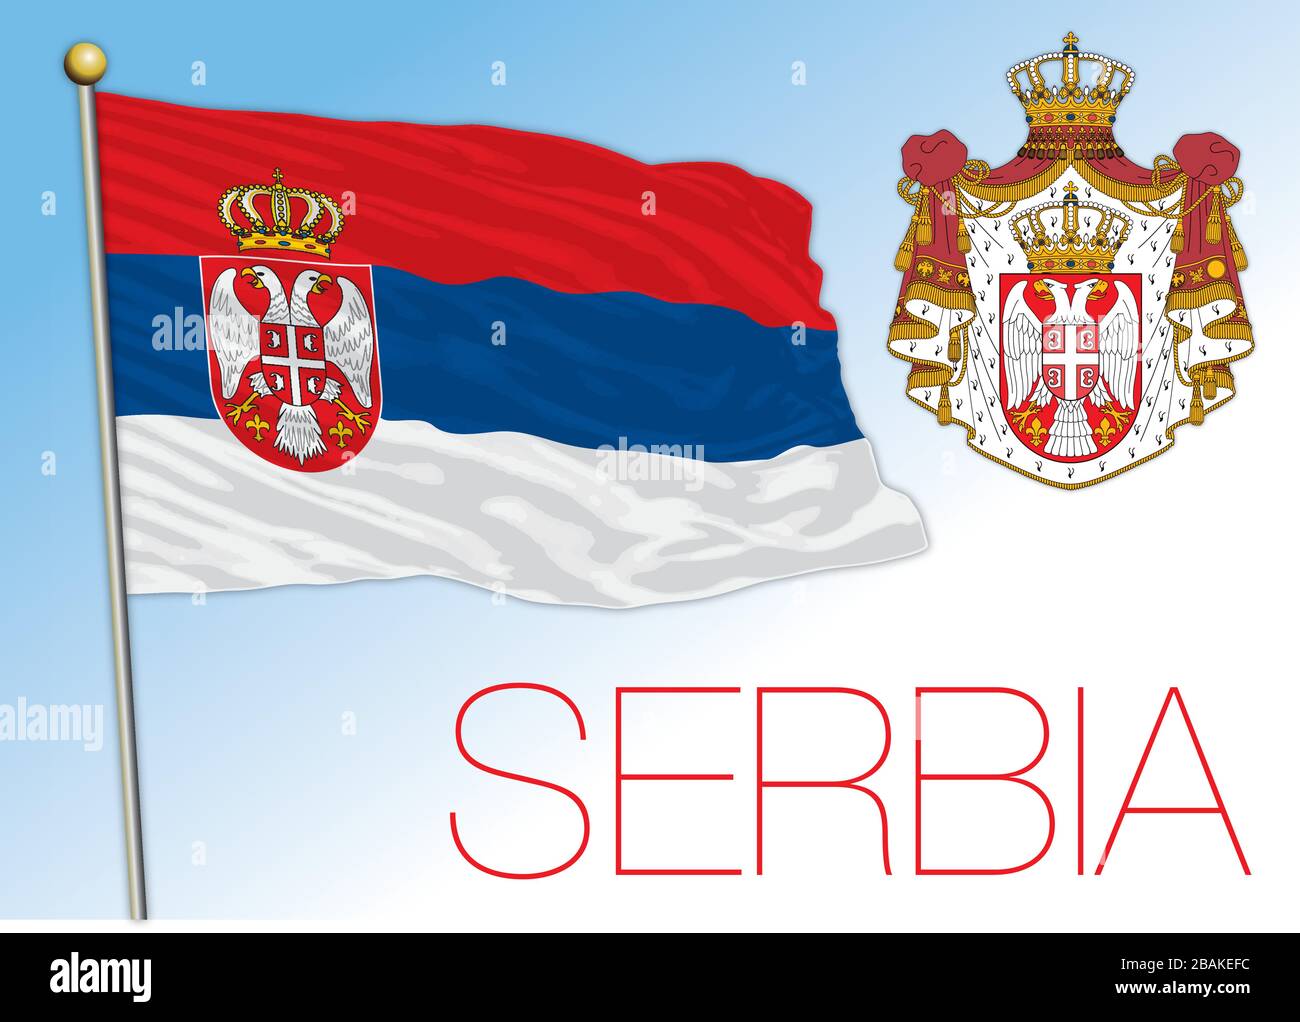 Serbia official national flag and coat of arms, european country, vector illustration Stock Vector